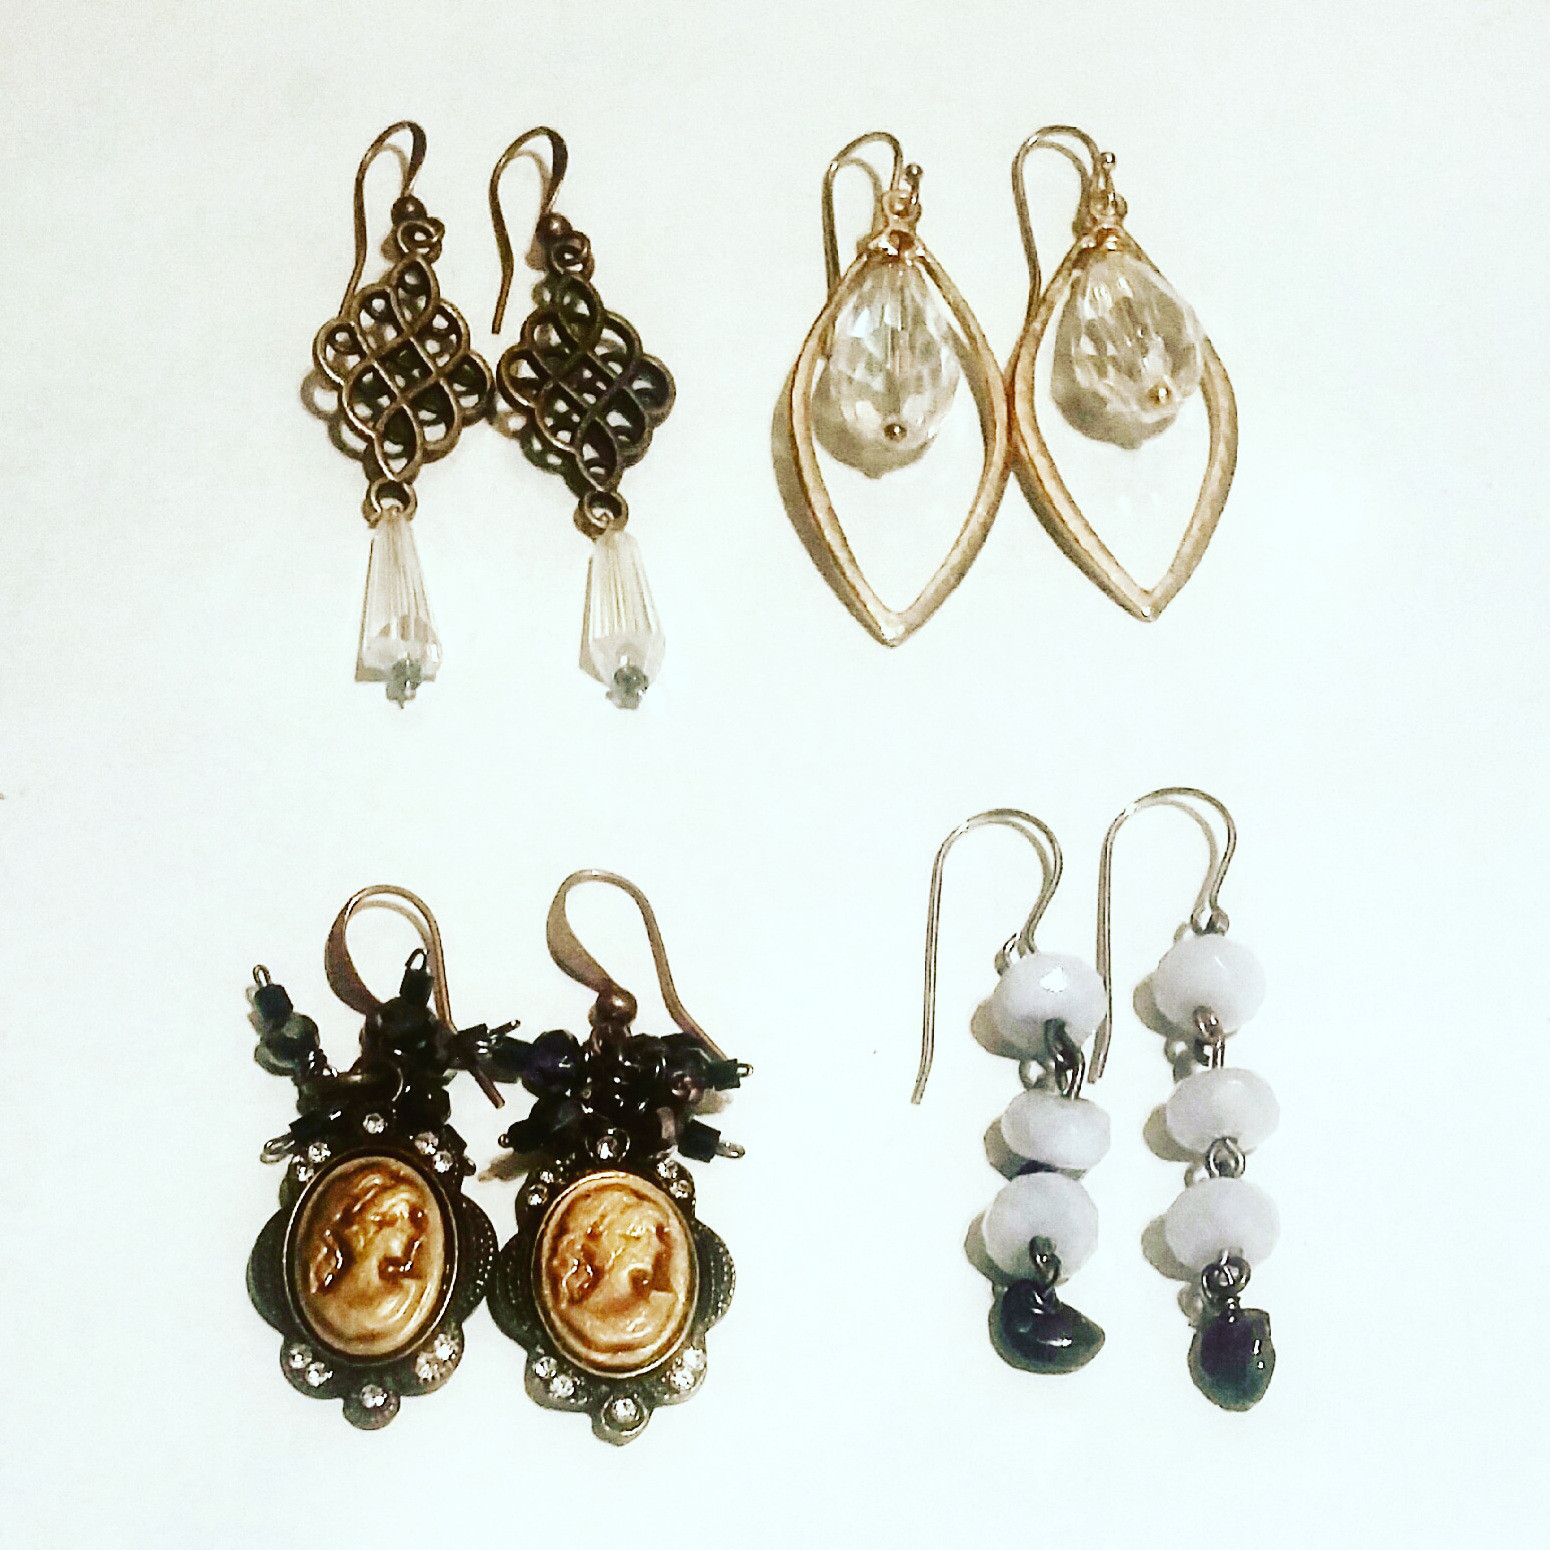 Victorian-inspired earrings by Y'vonne Page-Magnus